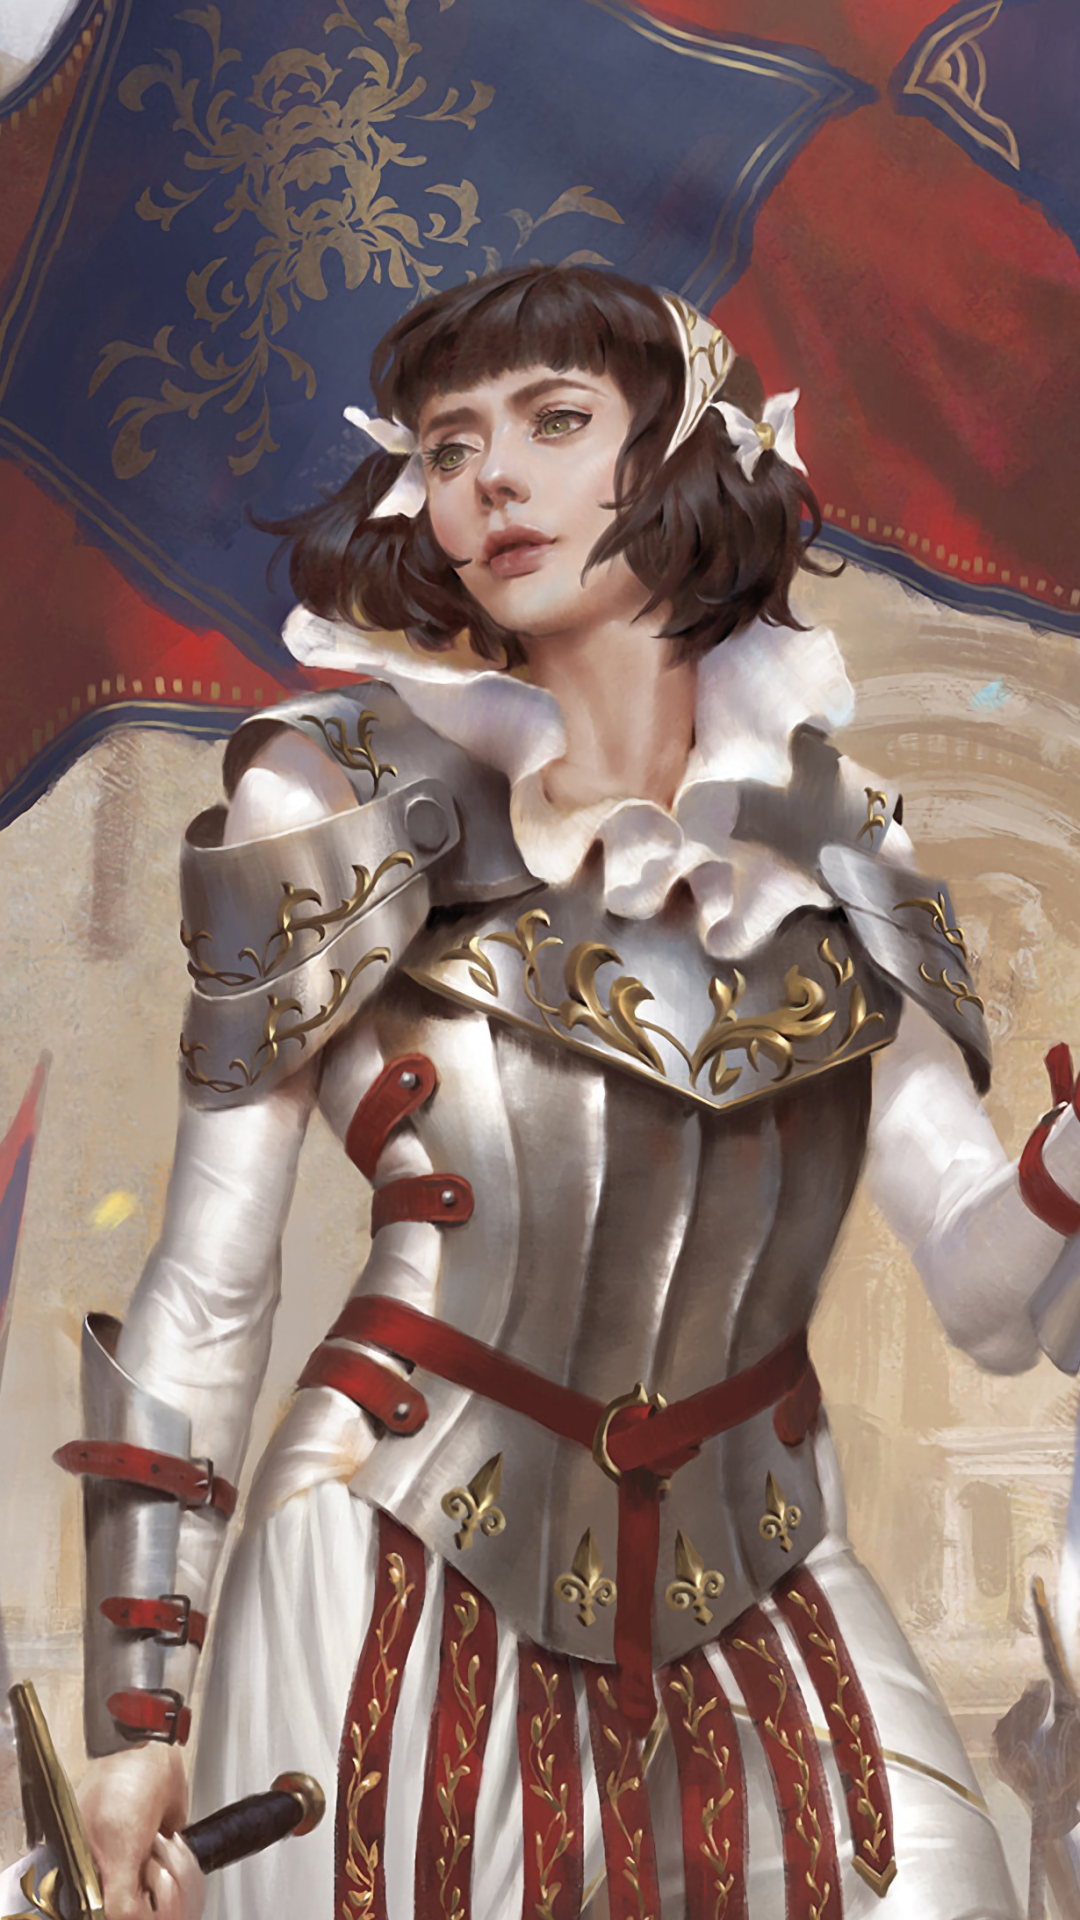 Legend of the Cryptids Joan of arc by Lius Lasahido